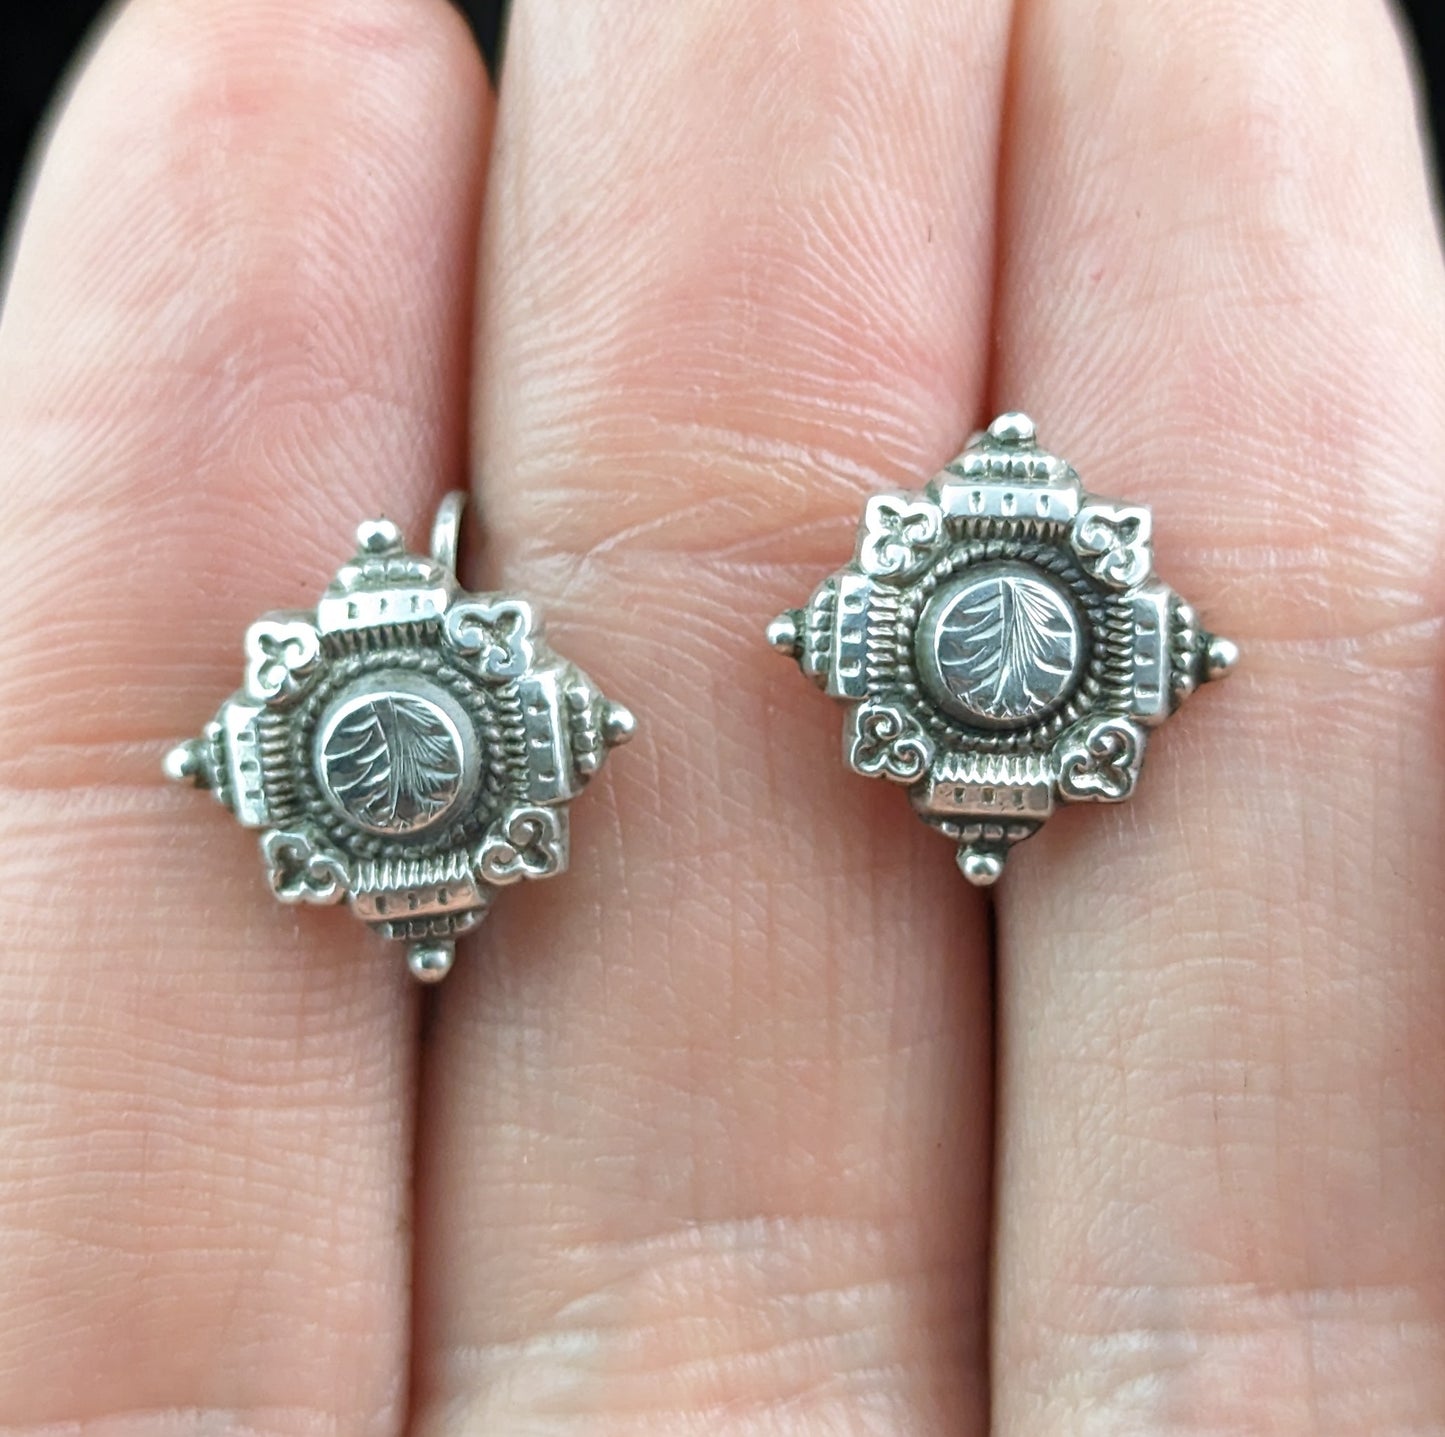 Antique Victorian sterling silver earrings, Aesthetic